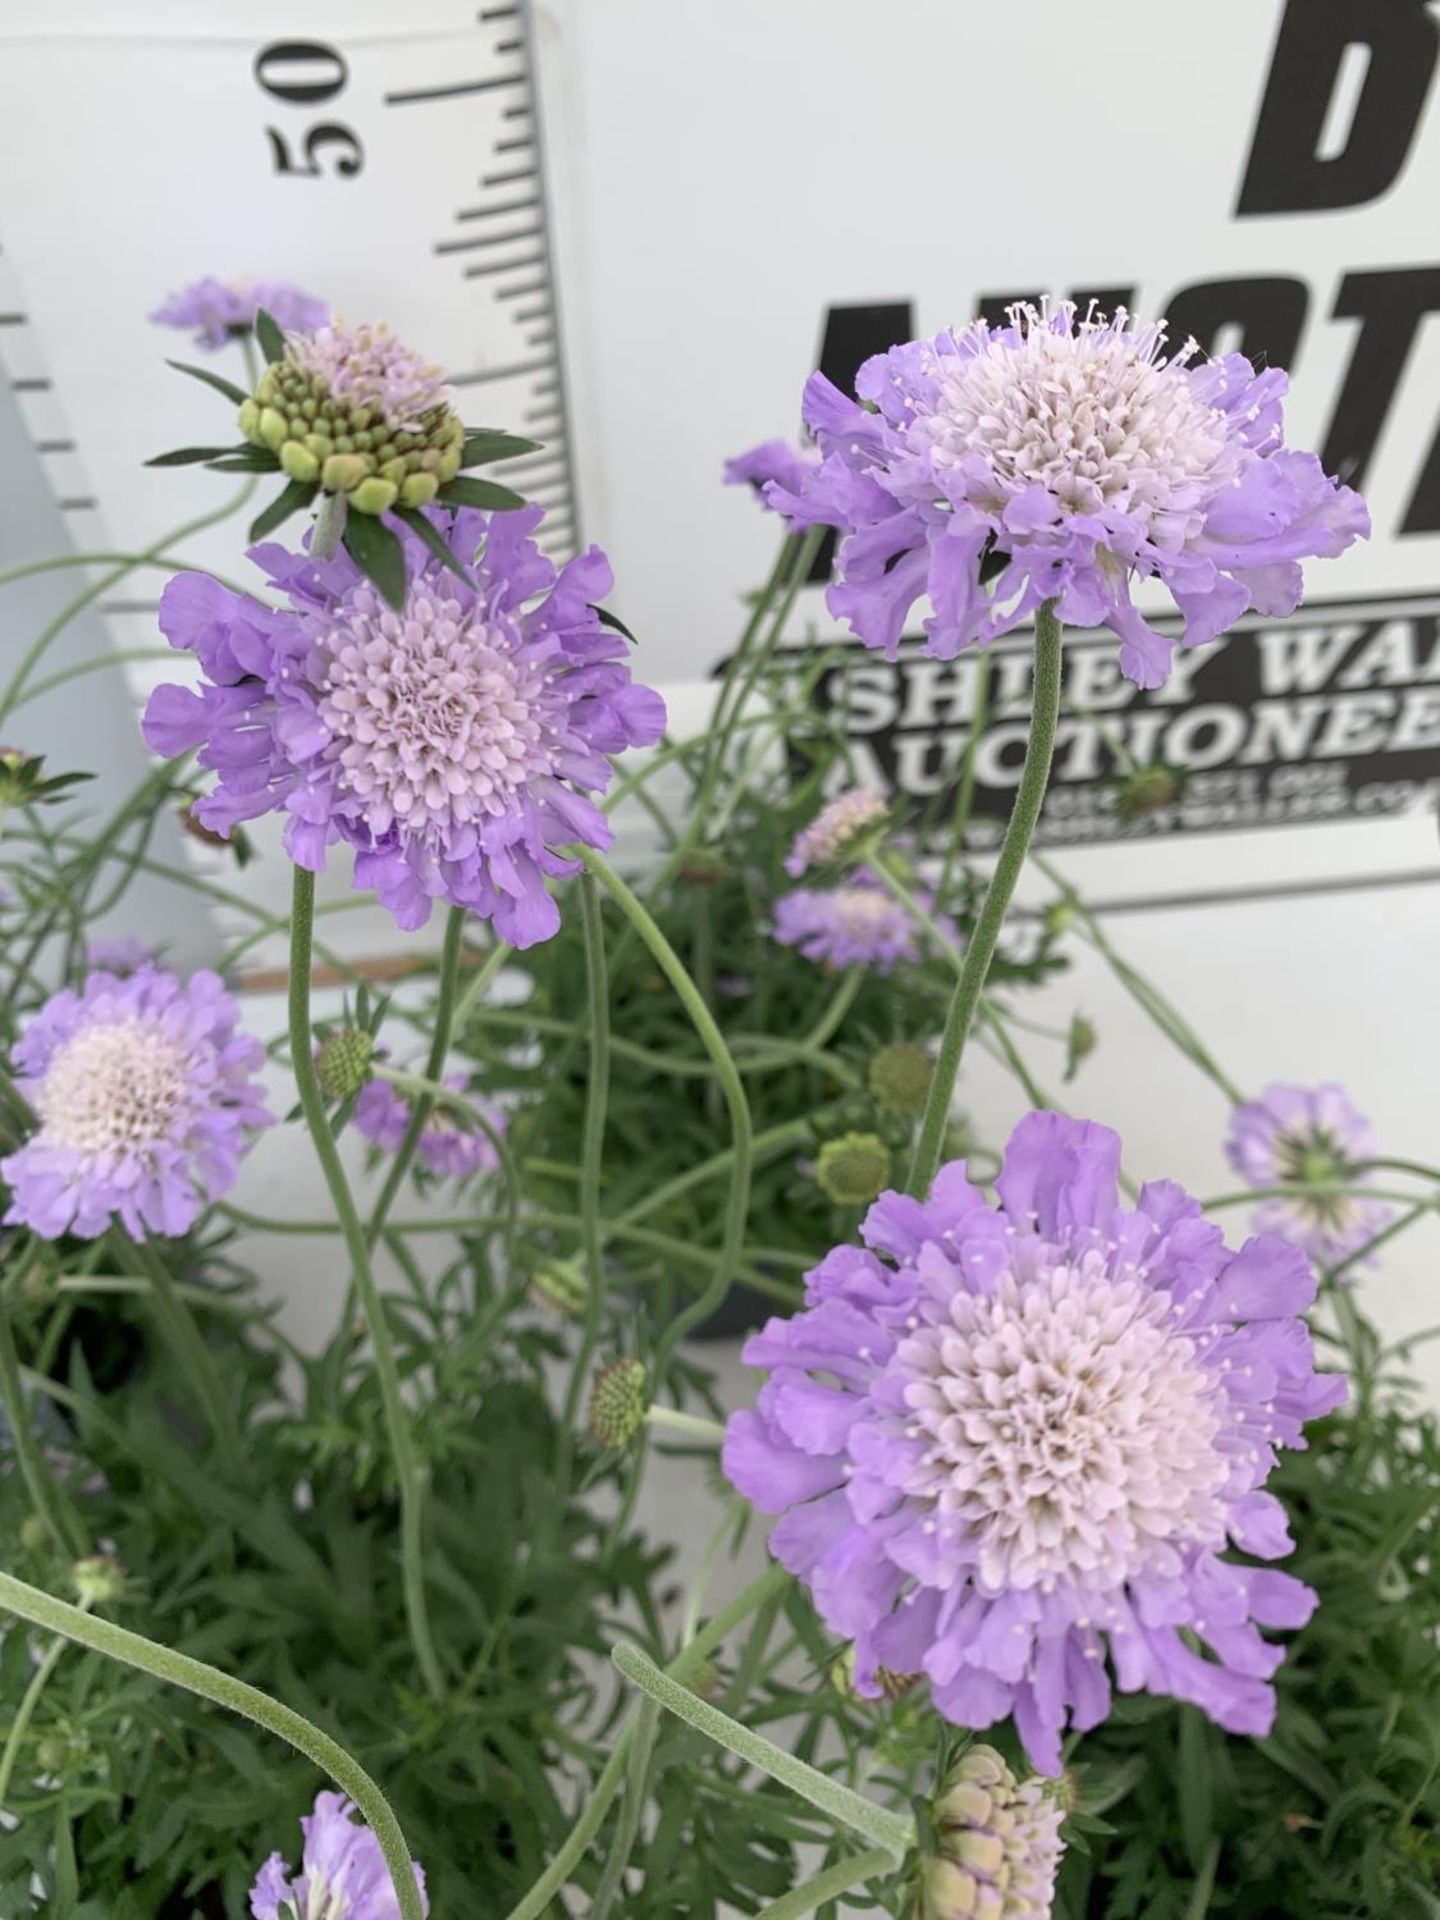 SIX SCABIOSA BUTTERFLY BLUE IN 2 LTR POTS 50-60CM TALL TO BE SOLD FOR THE SIX PLUS VAT - Image 6 of 8